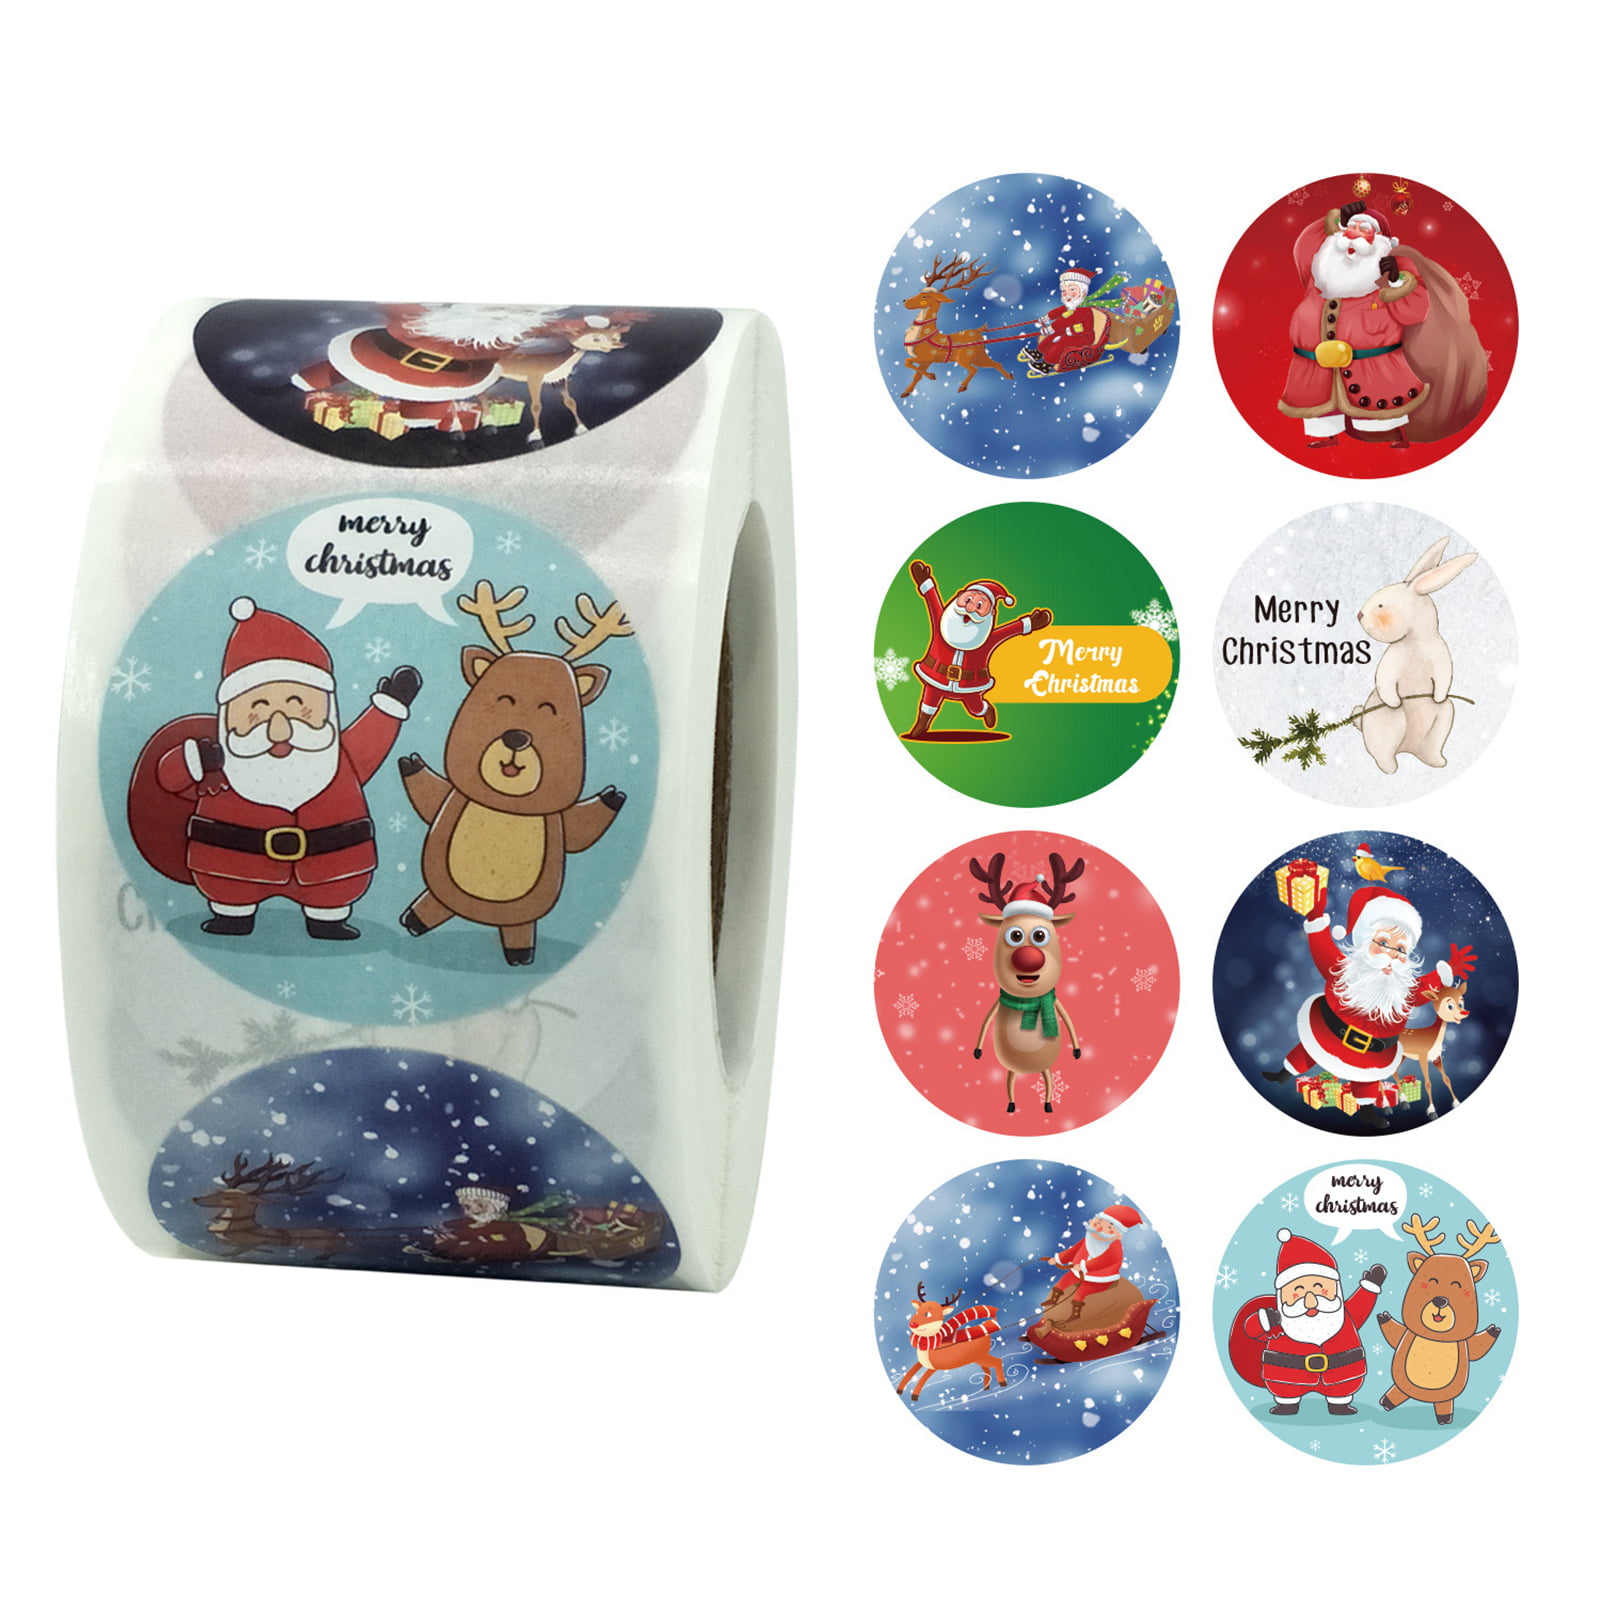 Merry Christmas Round Stickers Santa Deer New Year 2022 Package Scrapbook Decor 